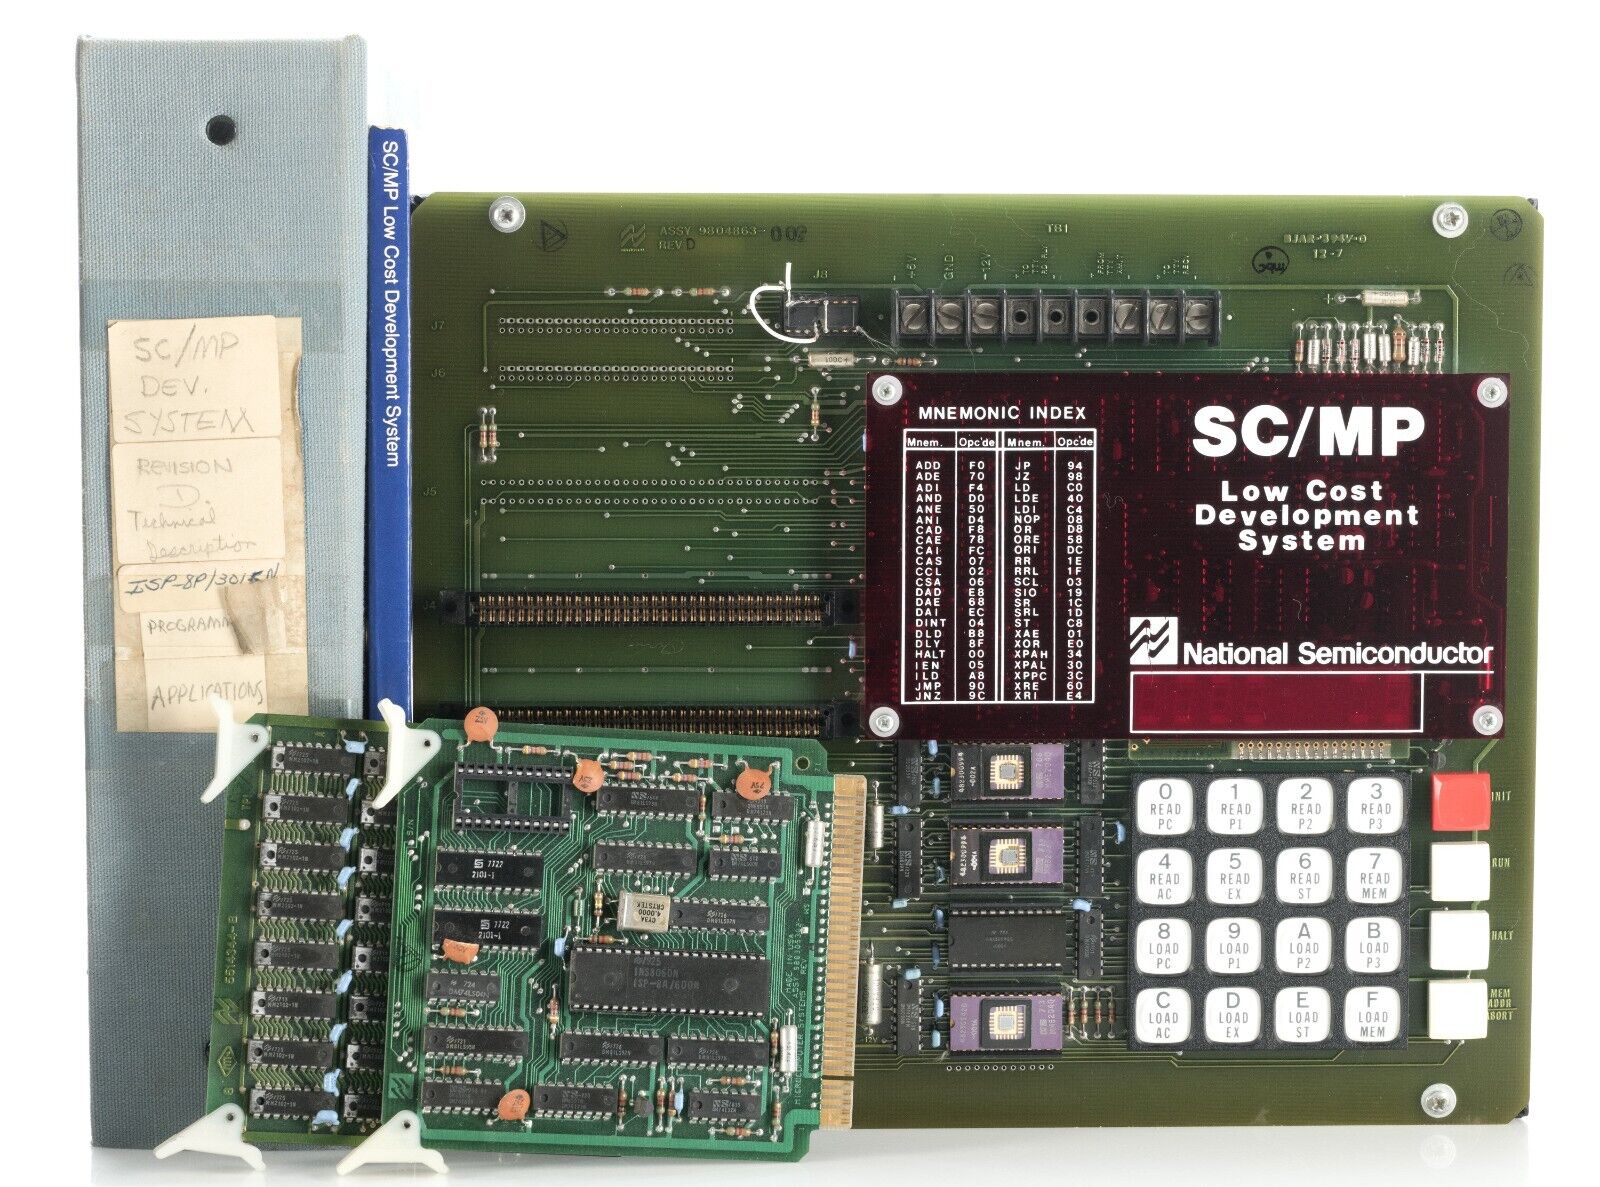 National Semiconductor SC/MP Low Cost Development System w/ Cards Manuals